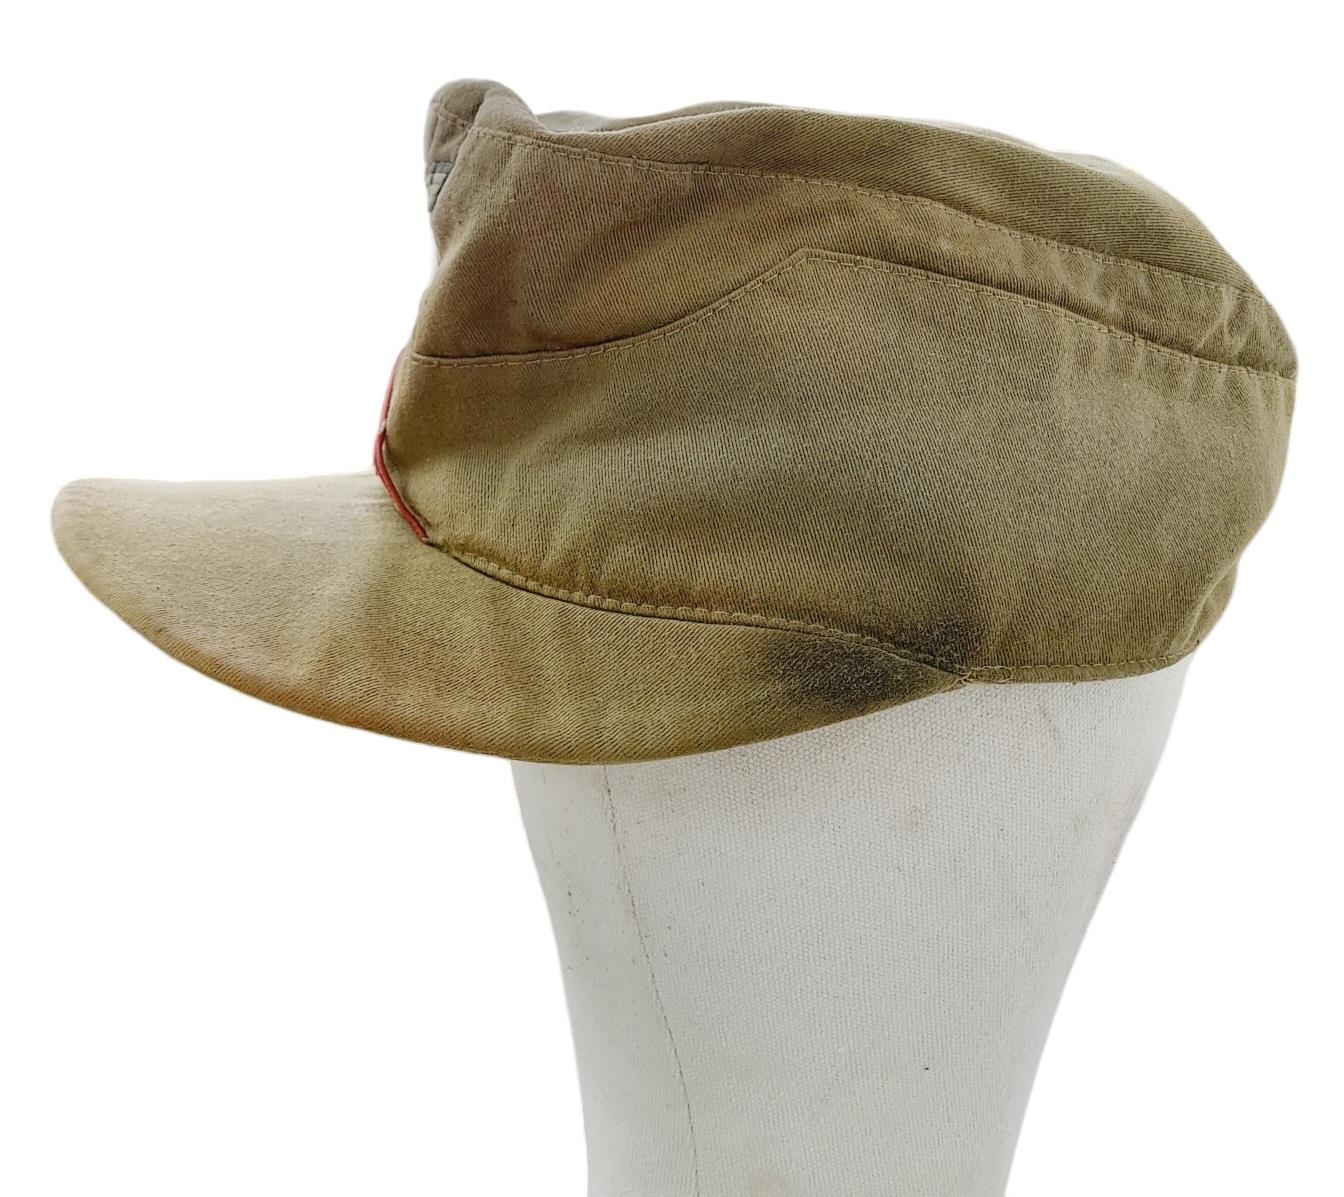 In Country Made Lightweight Africa Corps Artillery Cap. (No Vents) This is a typical example of a - Image 2 of 6